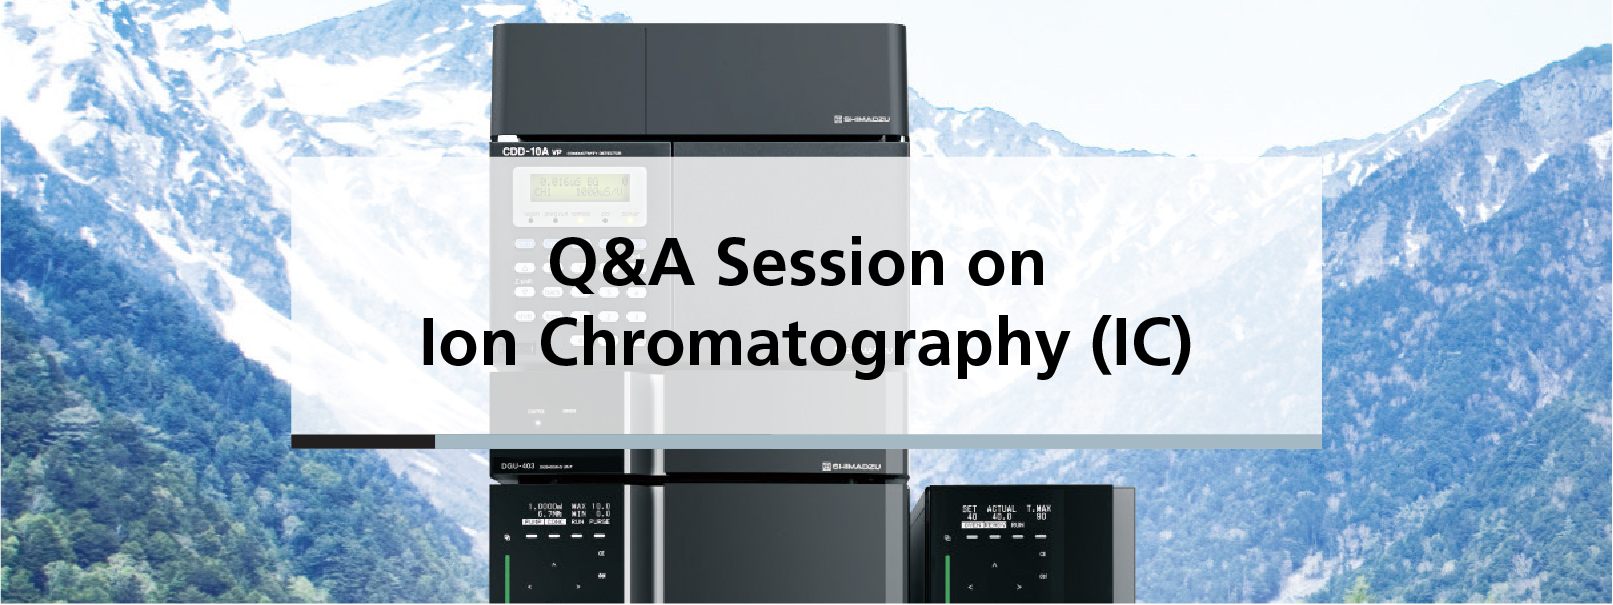 Q&A Session on Ion Chromatography (IC)